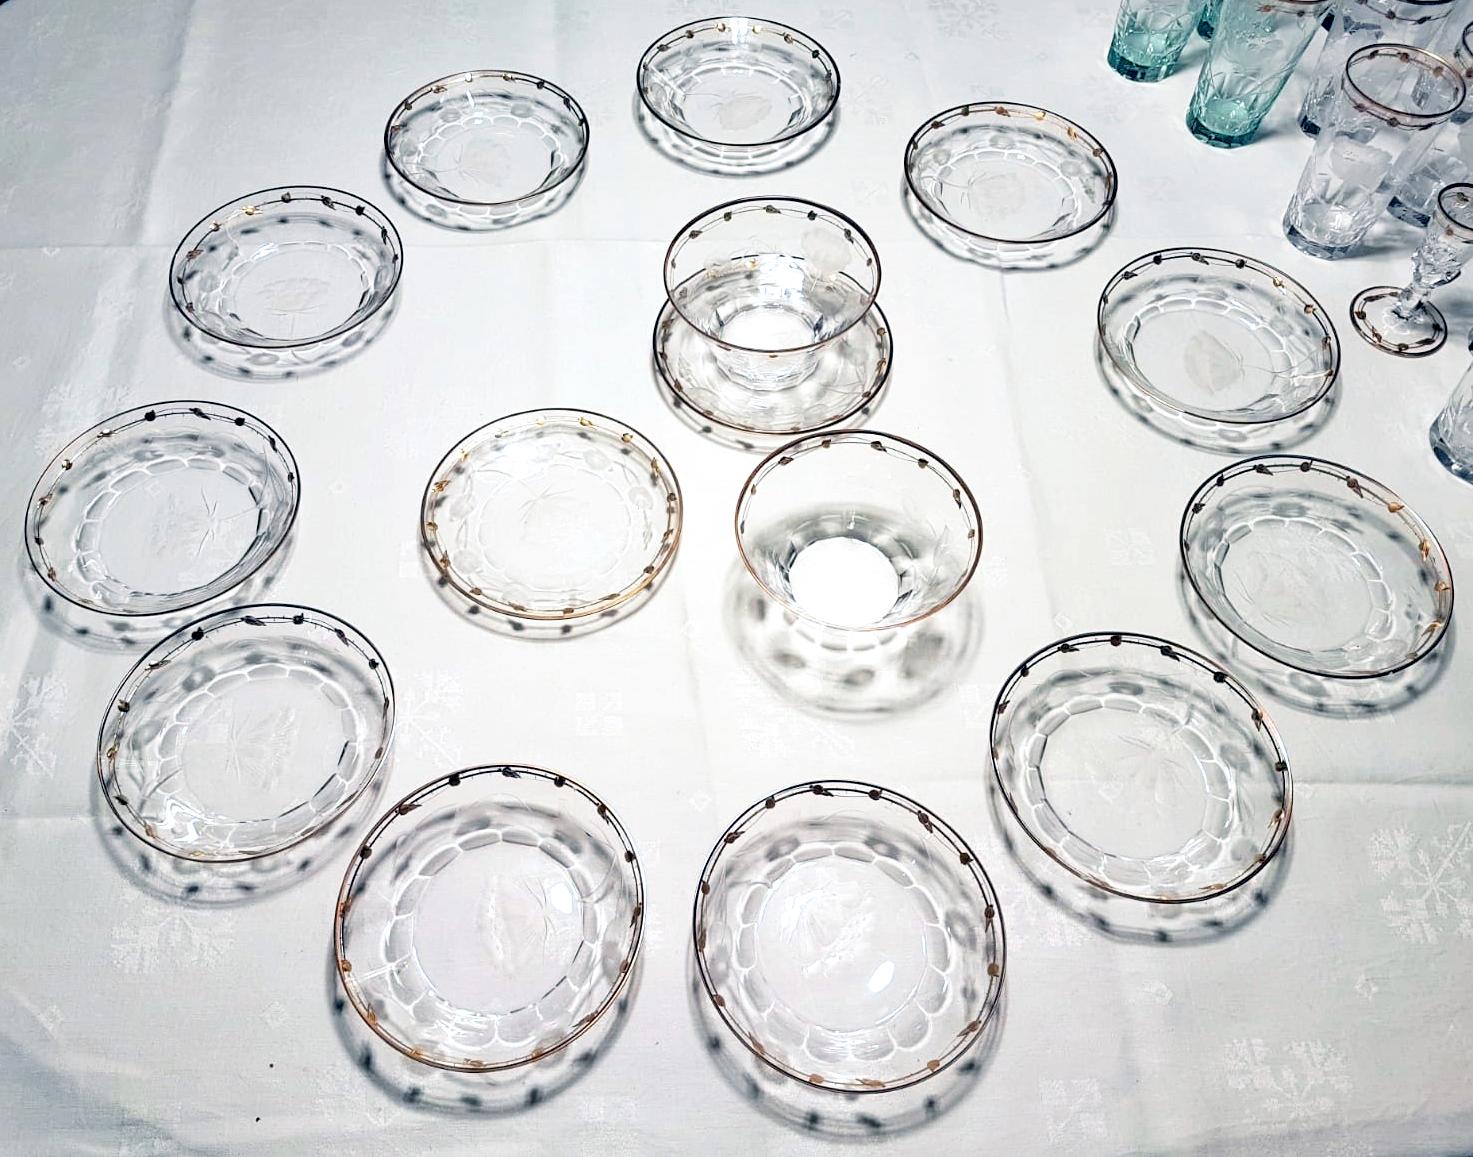 These are 7 small plates of handblown crystal made by Moser in the ever popular Art Nouveau 